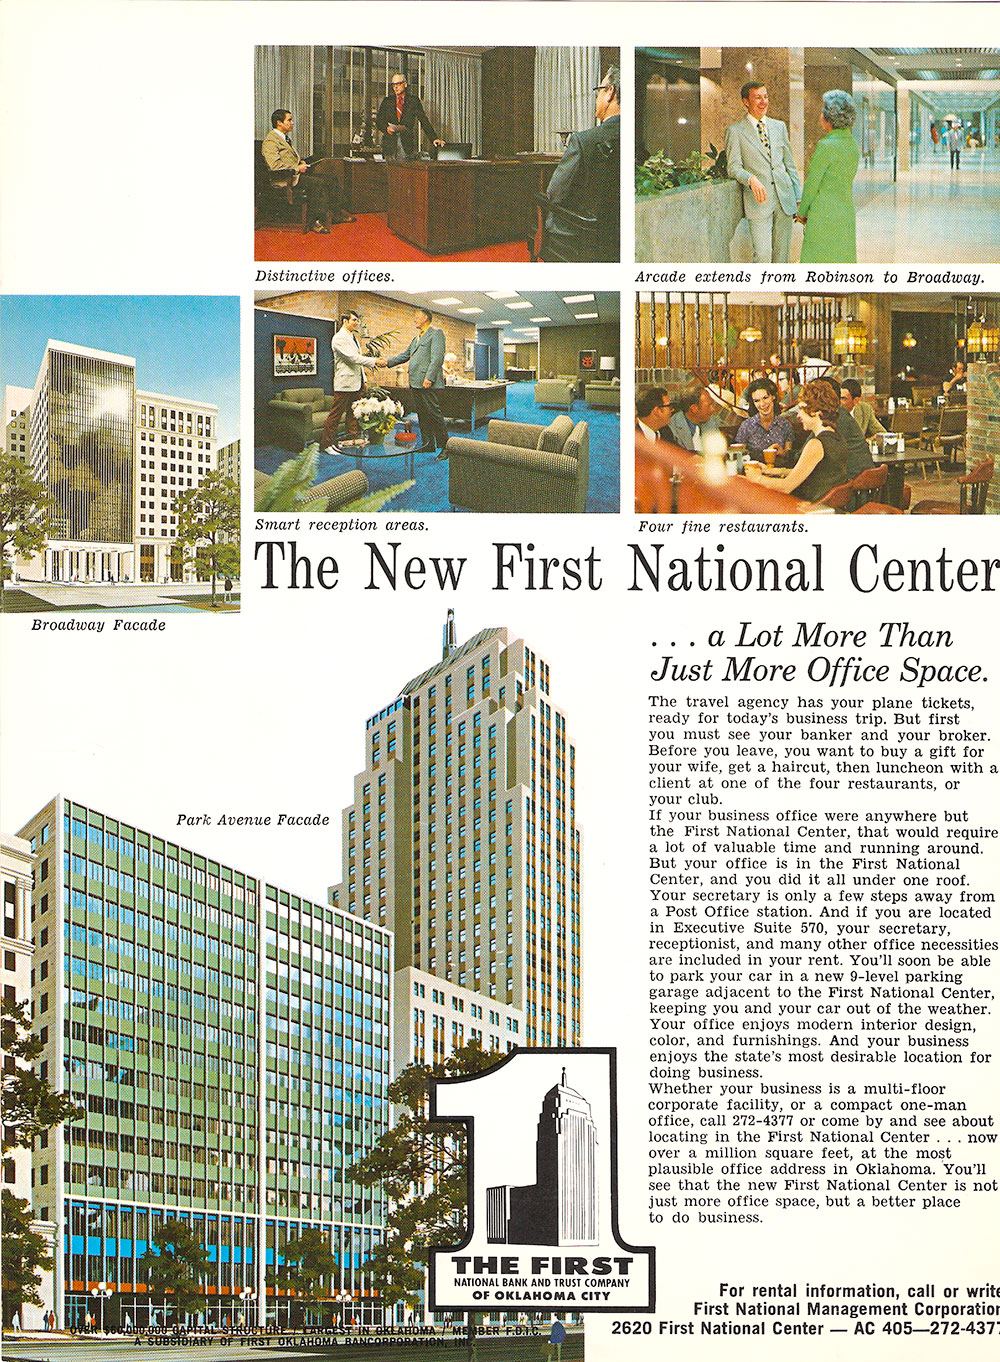 (FNB.2010.16.04) - Brochure Advertising New First National Center, c. 1972